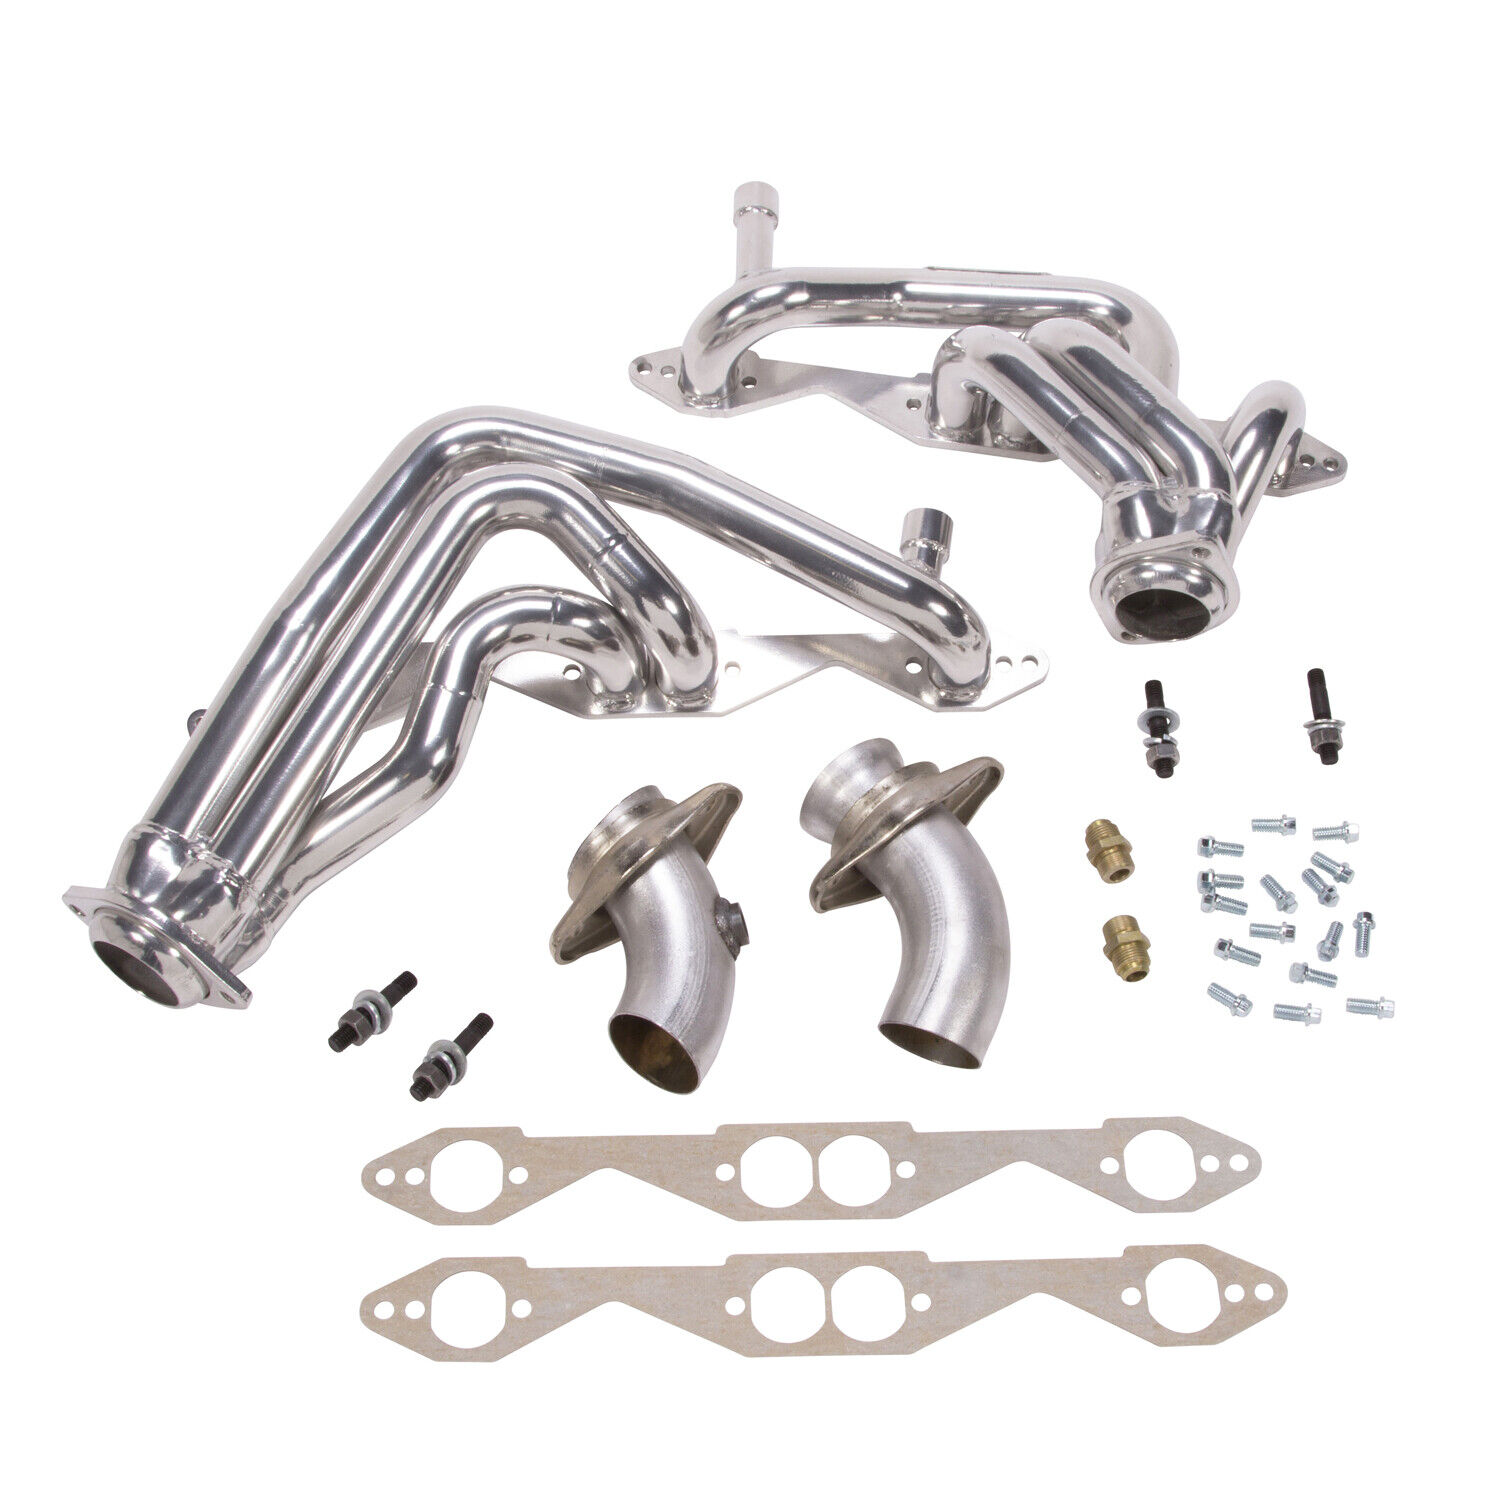 Fits 1993-1996 Chevy Impala SS 1-5/8 Shorty Headers-Silver-15950